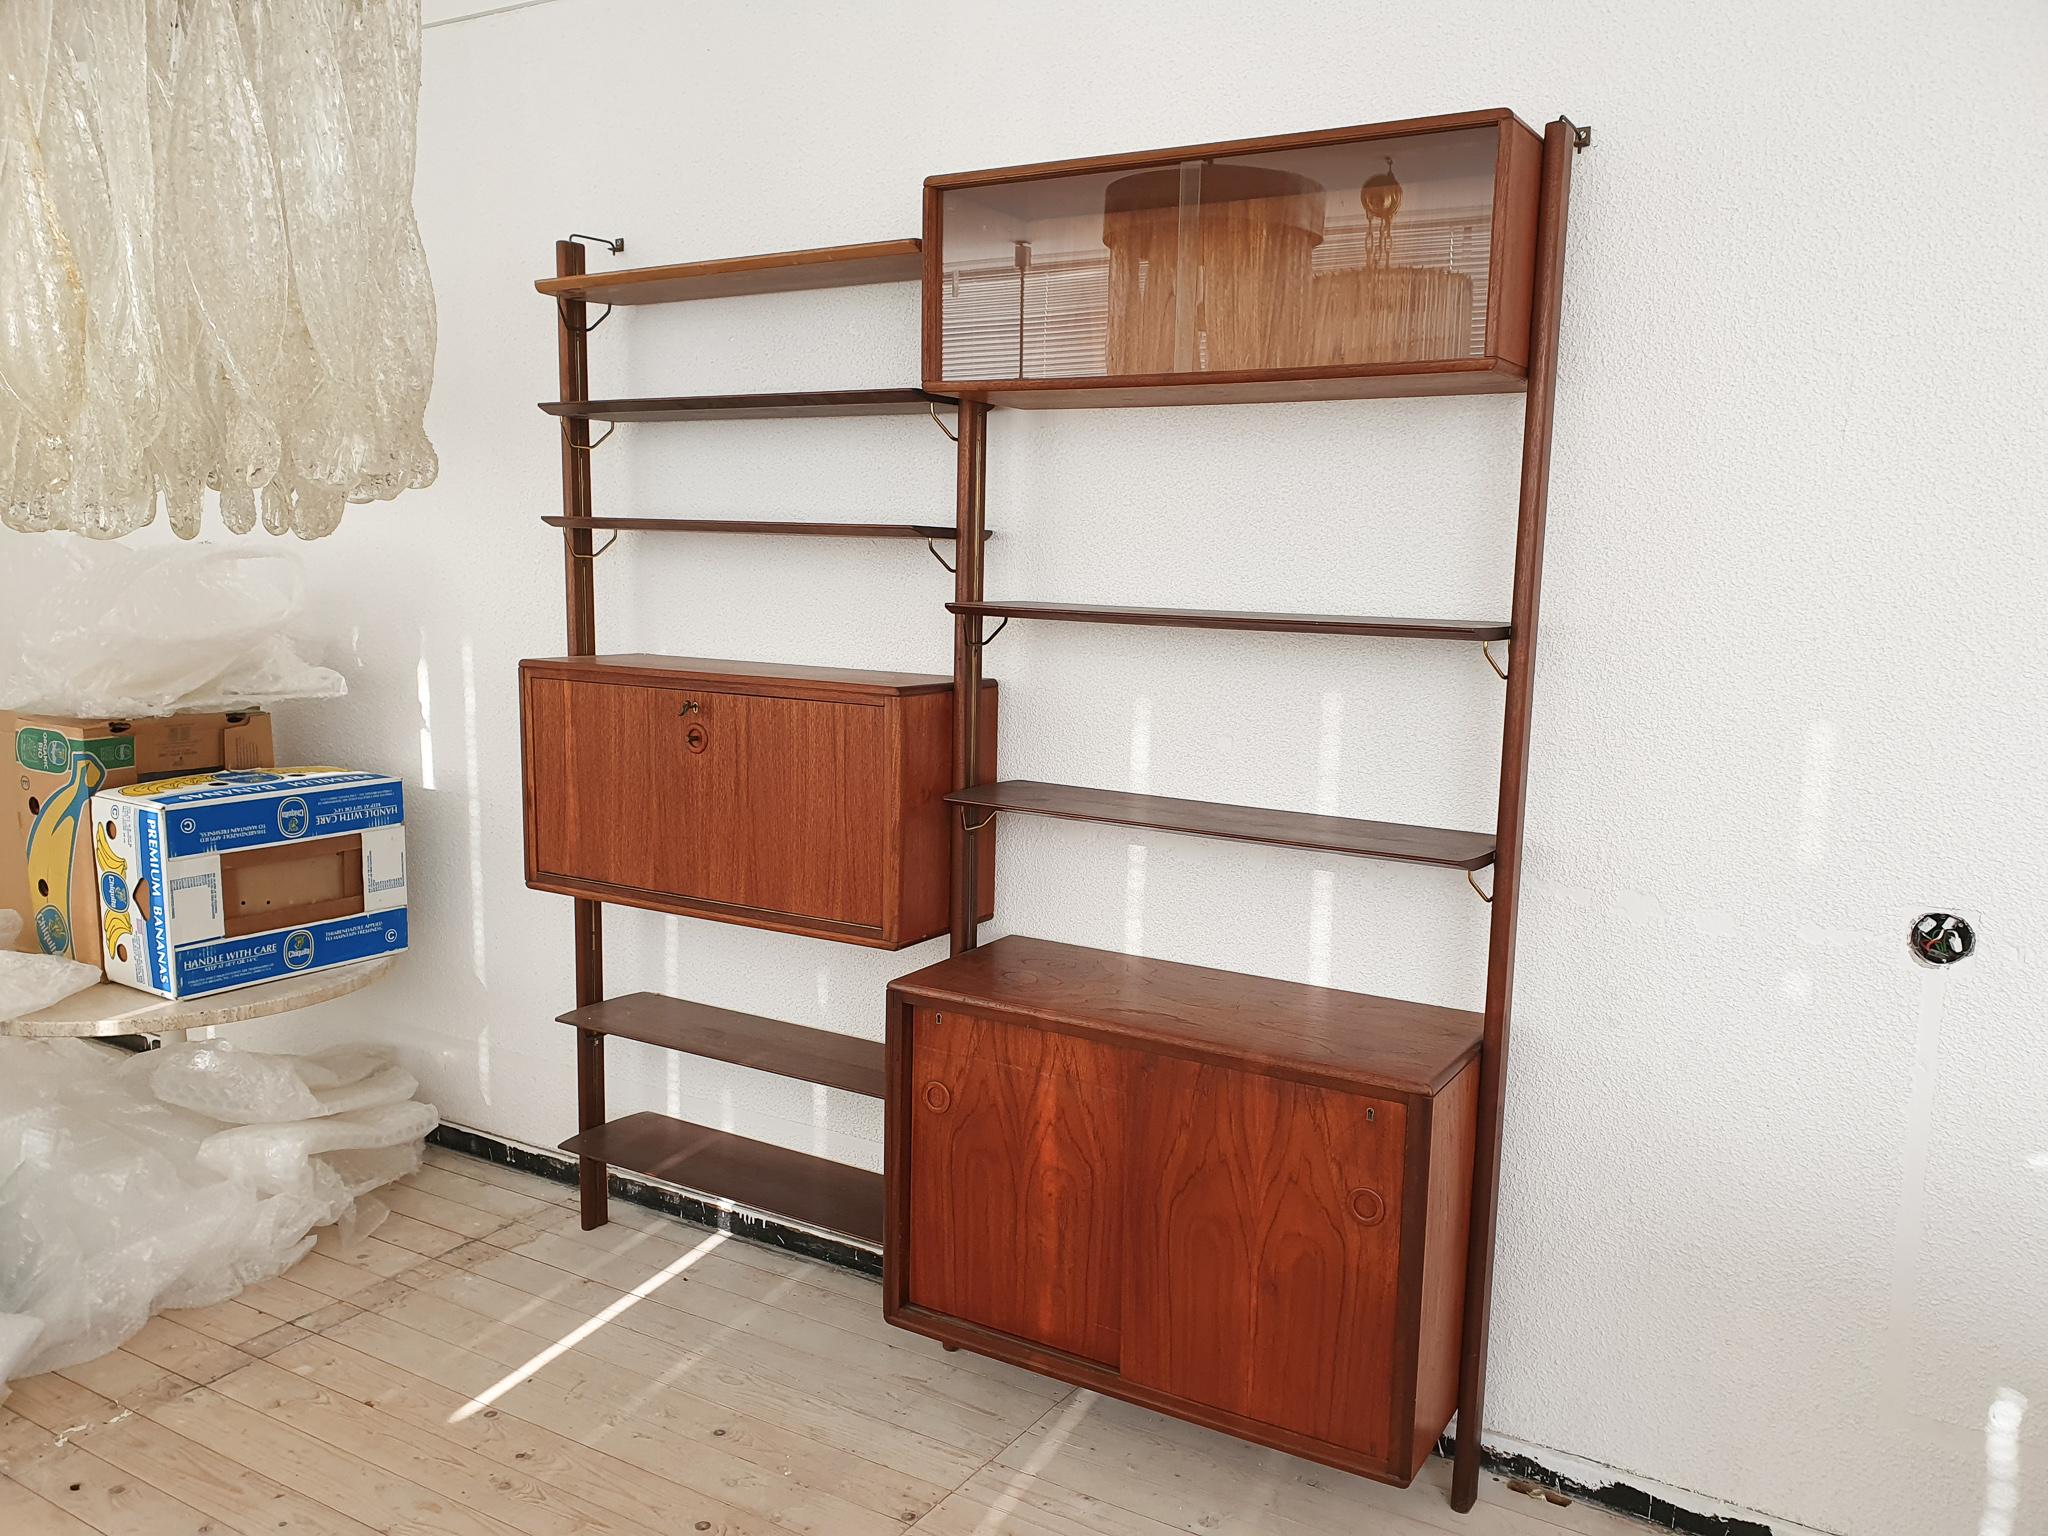 High quality wooden wall unit with brass hooks. Three cabinets and seven shelves.

7 x shelves: x cm
1x cabinet glass doors: cm (LxDxH)
1 x desk cabinet: cm (LxDxH)
1x cabinet with sliding doors: cm (LxDxH)